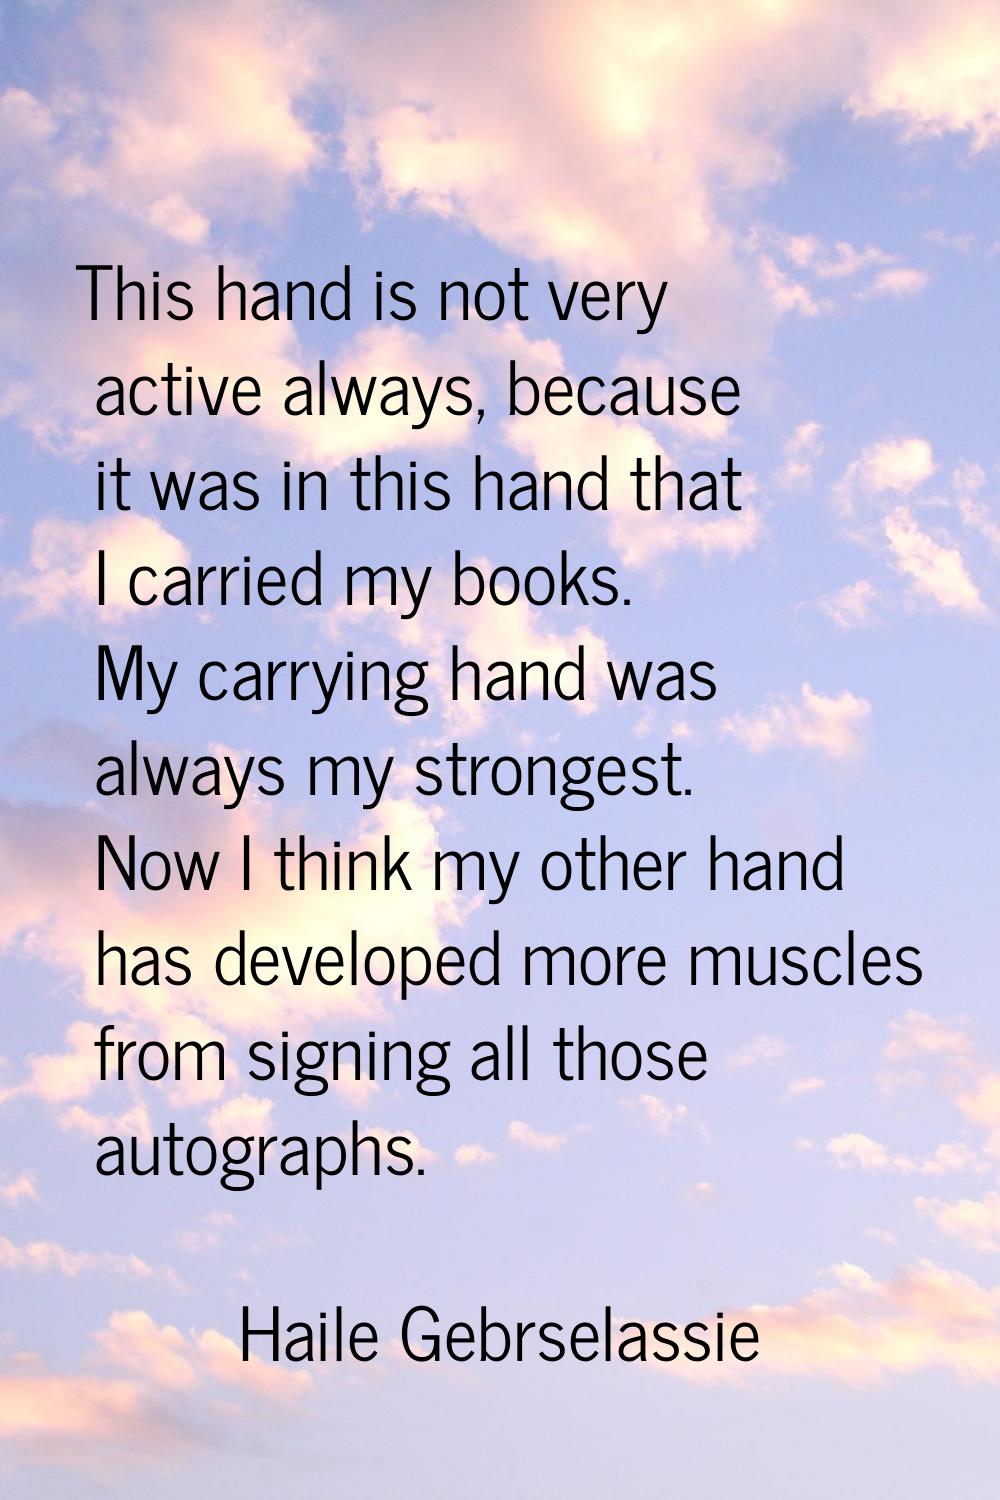 This hand is not very active always, because it was in this hand that I carried my books. My carryi